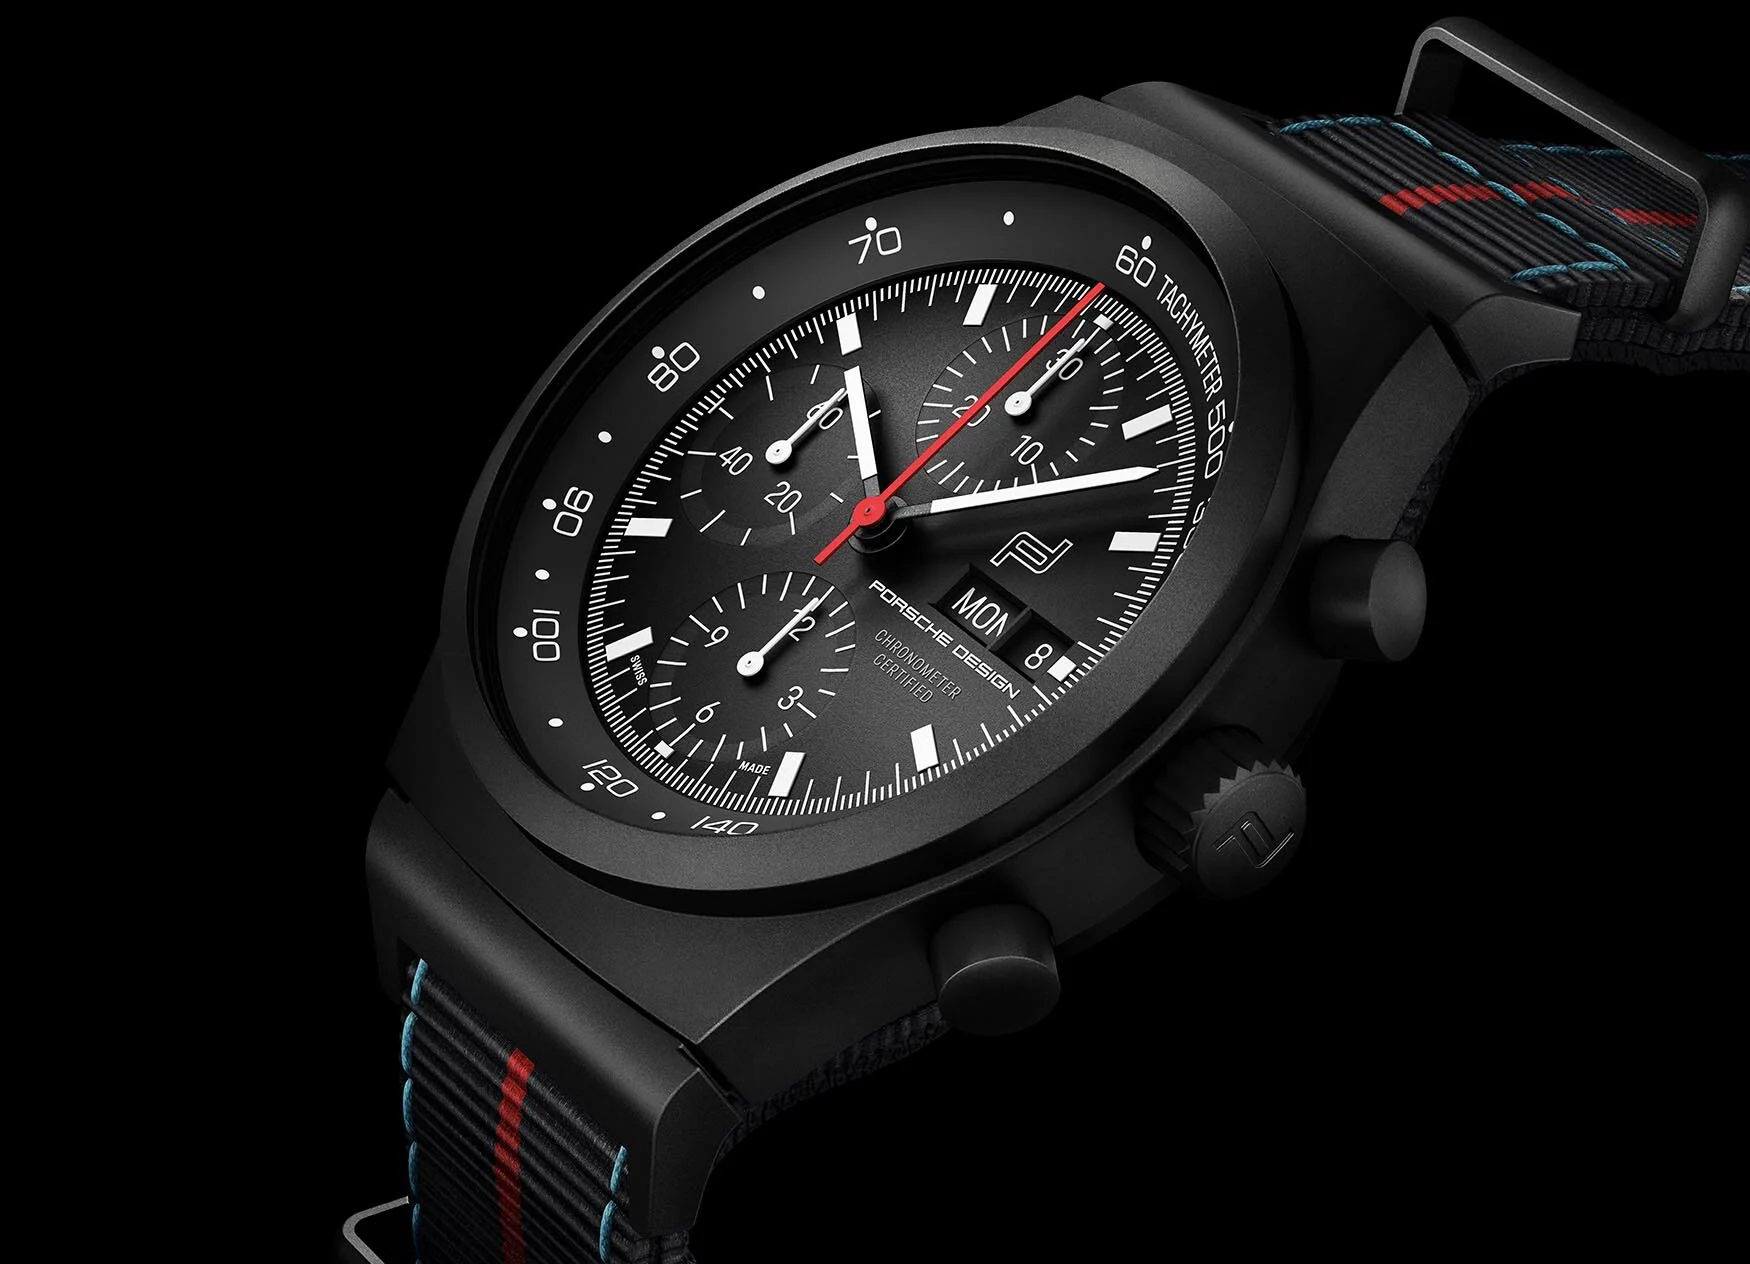 Back in black: The Porsche Design Chronograph 1 celebrates 75 Years of the  iconic car brand